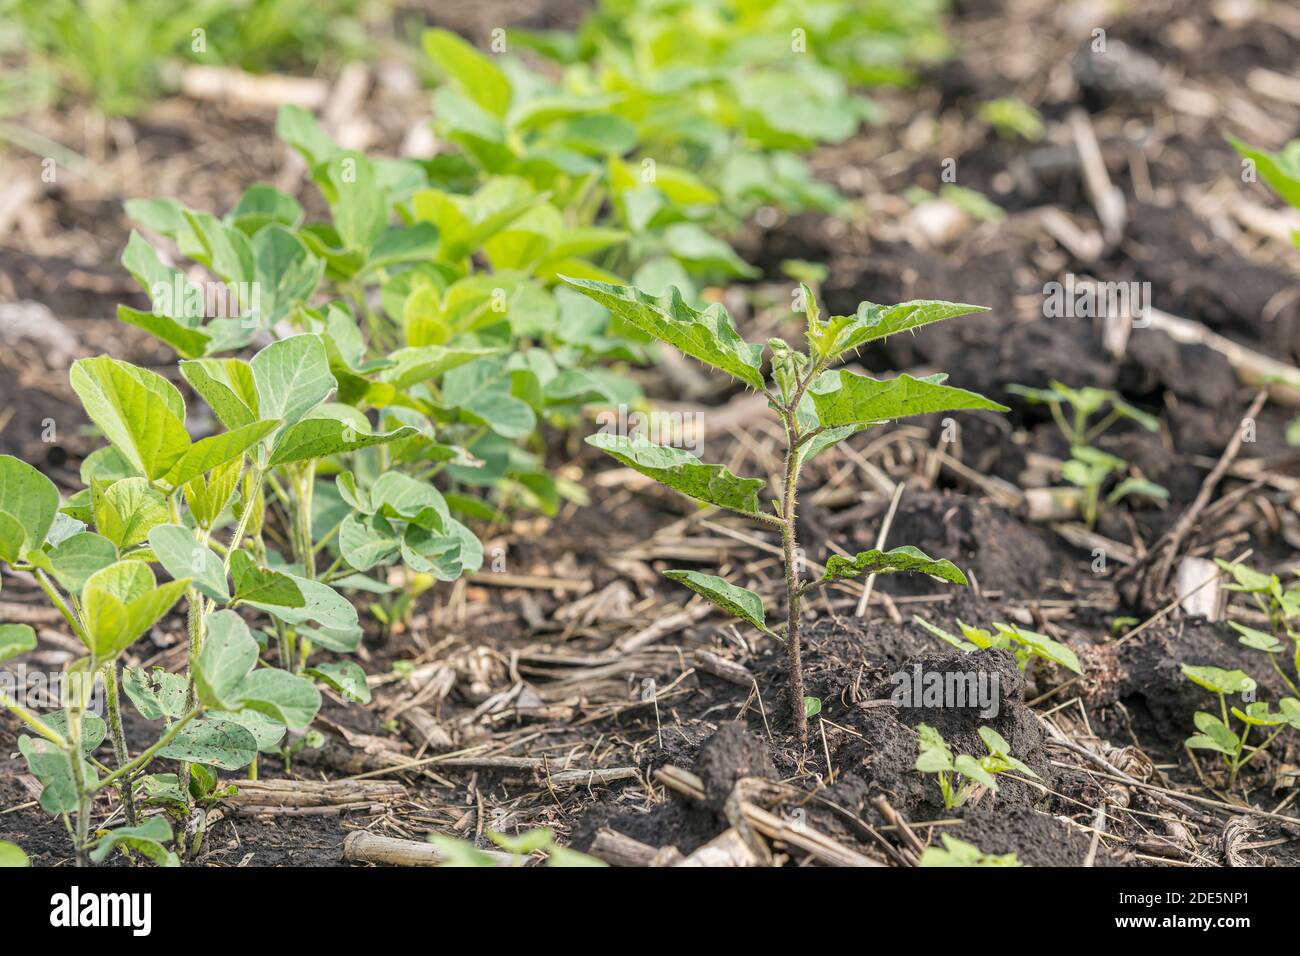 Common cocklebur weed growing in rows of soybean field. Concept of agricultural weed control and management with herbicide and cultivation methods Stock Photo